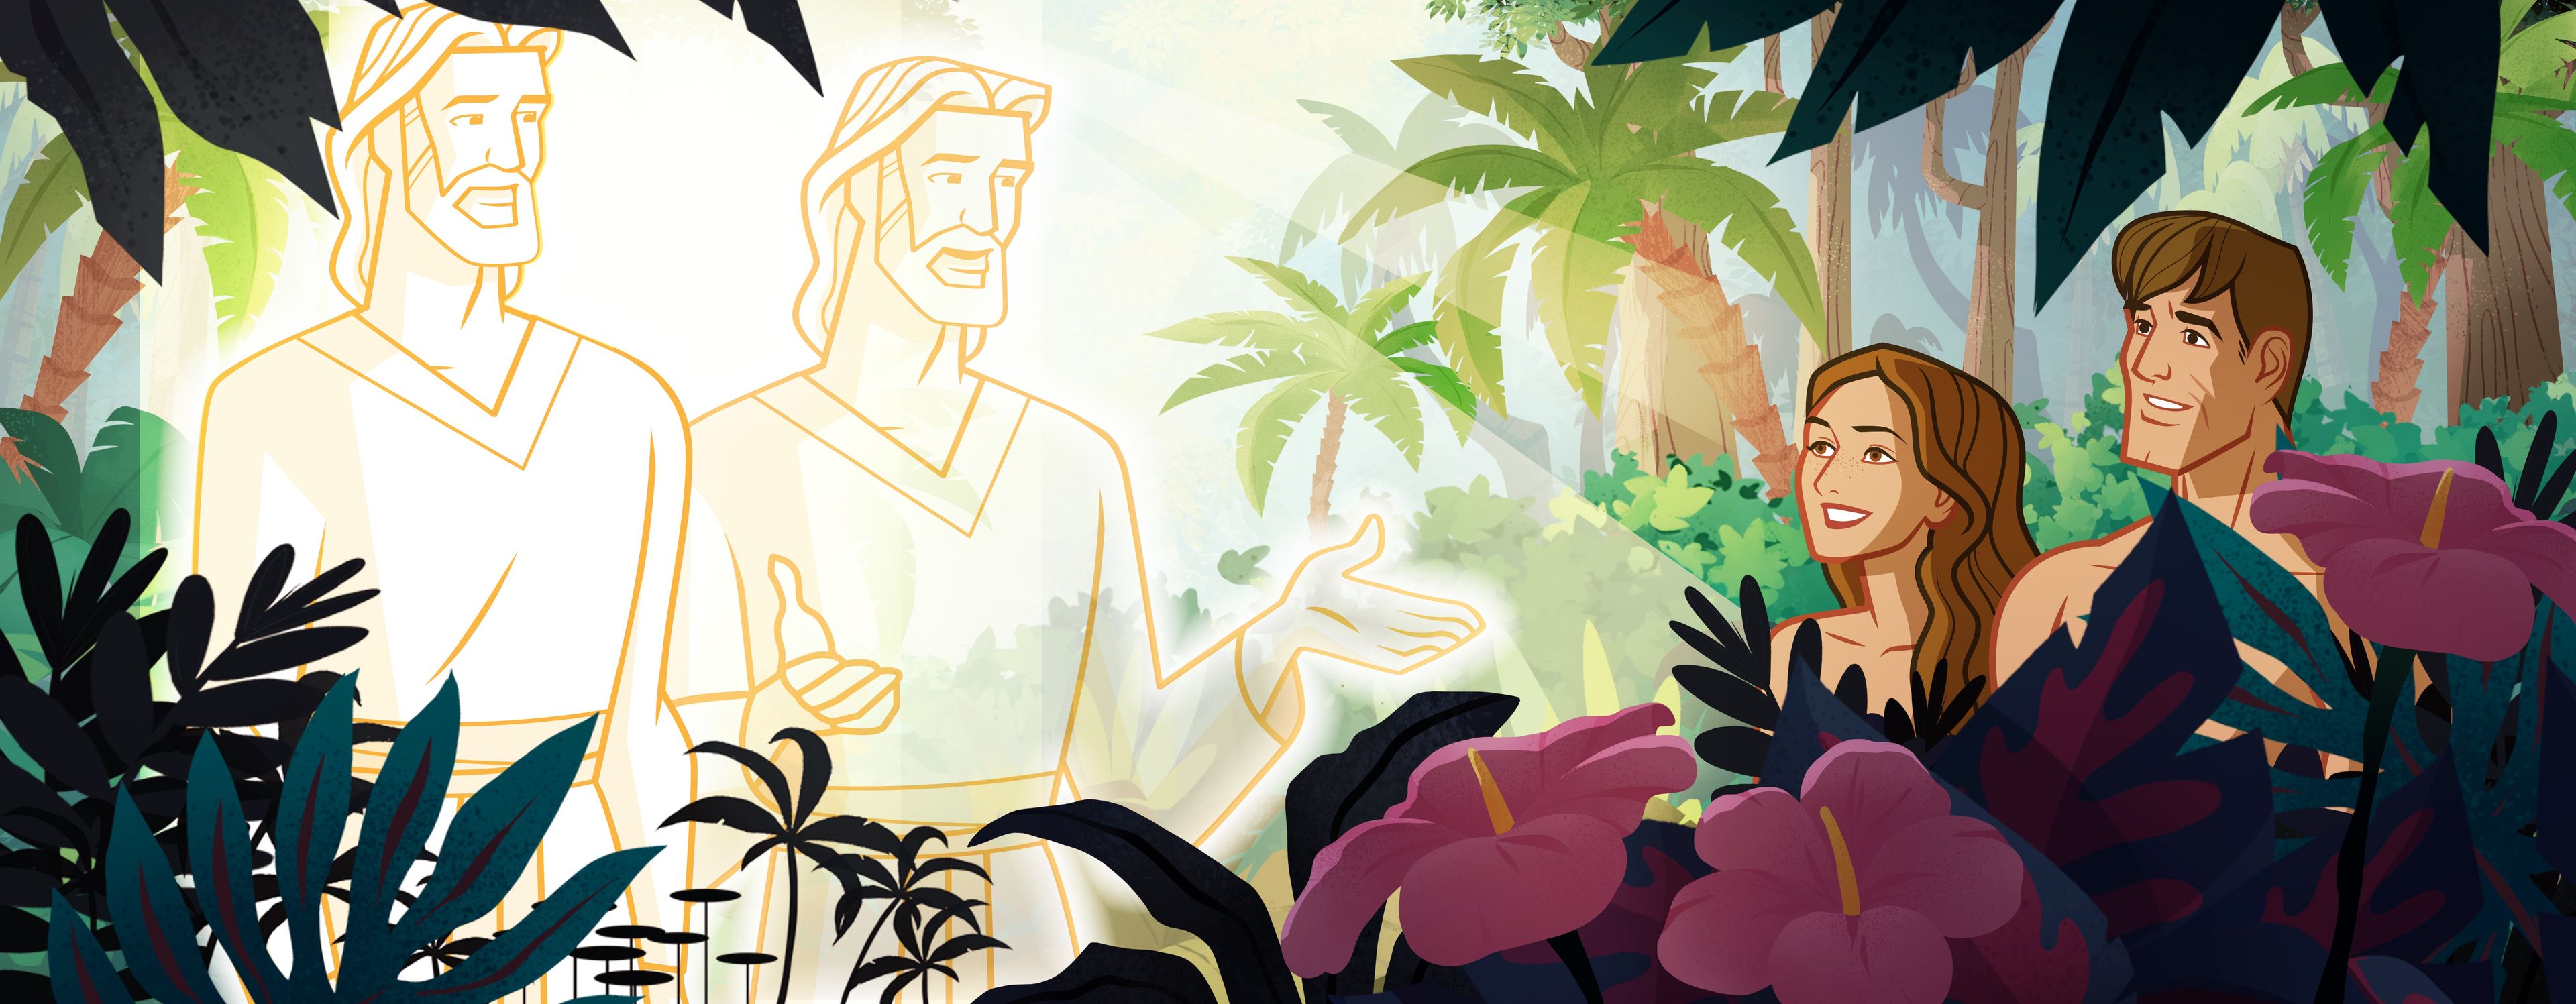 Illustration of Adam and Eve in the Garden. Exodus 6:2–3; 2 Chronicles 20:20; Amos 3:7; 2 Peter 1:21; Moses 2:1